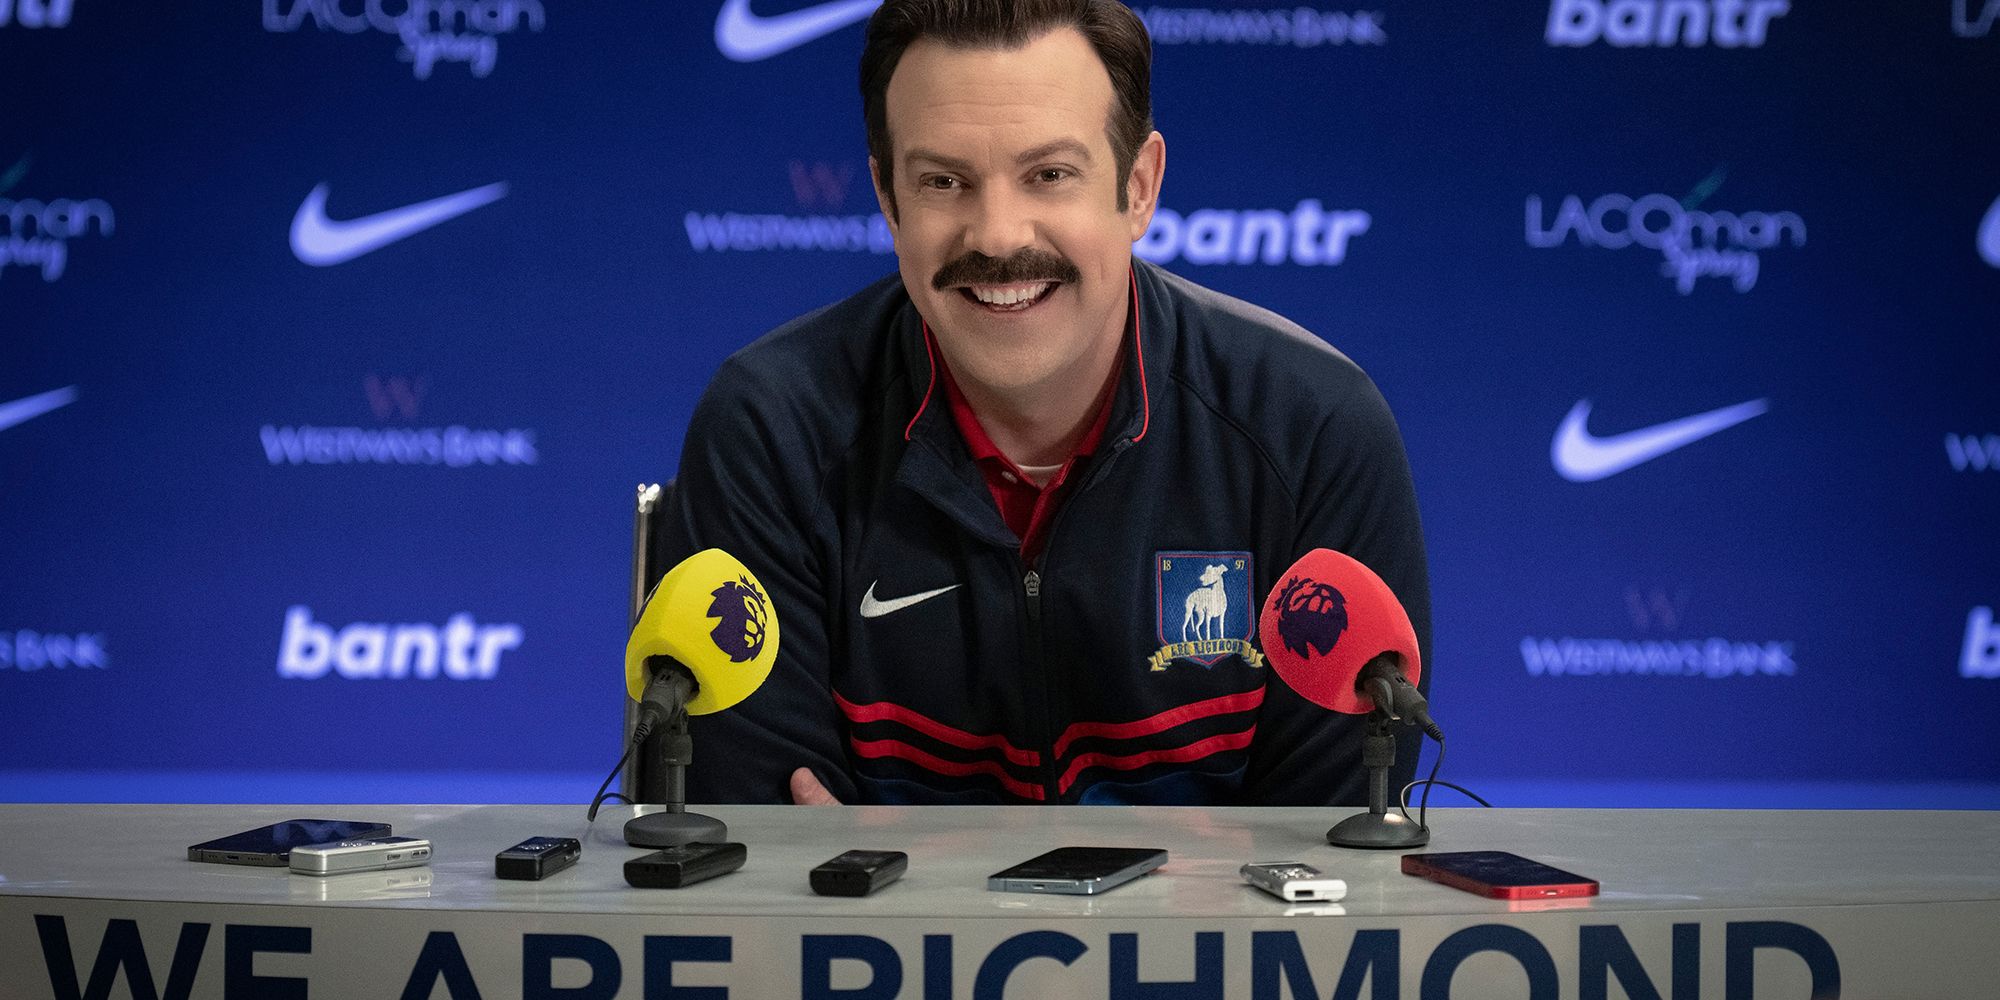 Ted Lasso Season 3 Review: AFC Richmond Just Keeps Getting Better